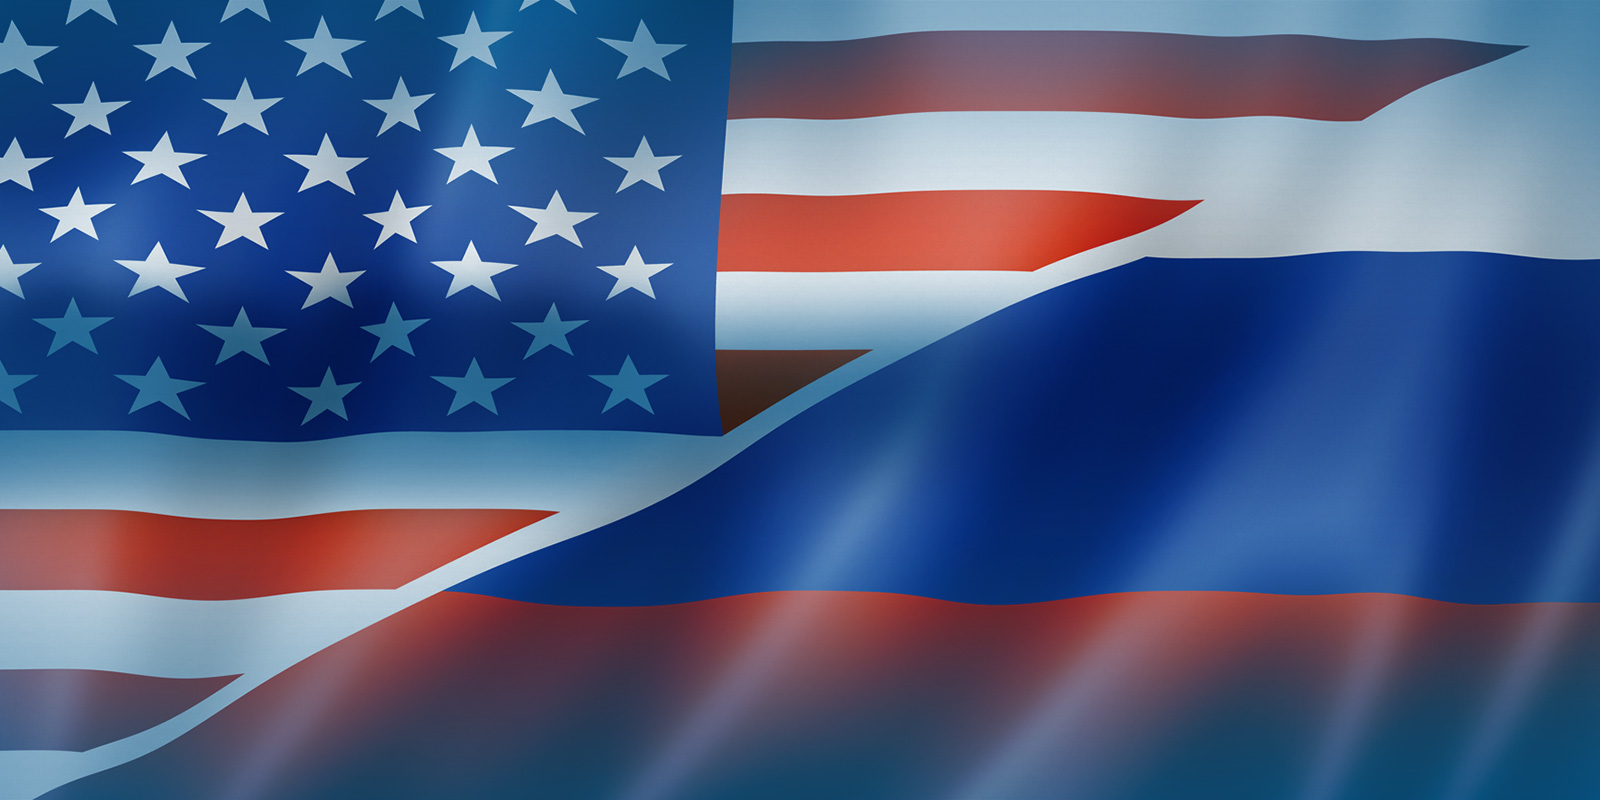 U.S. Sanctions Imposed on Russian Individuals, Associated Entities and Government Officials